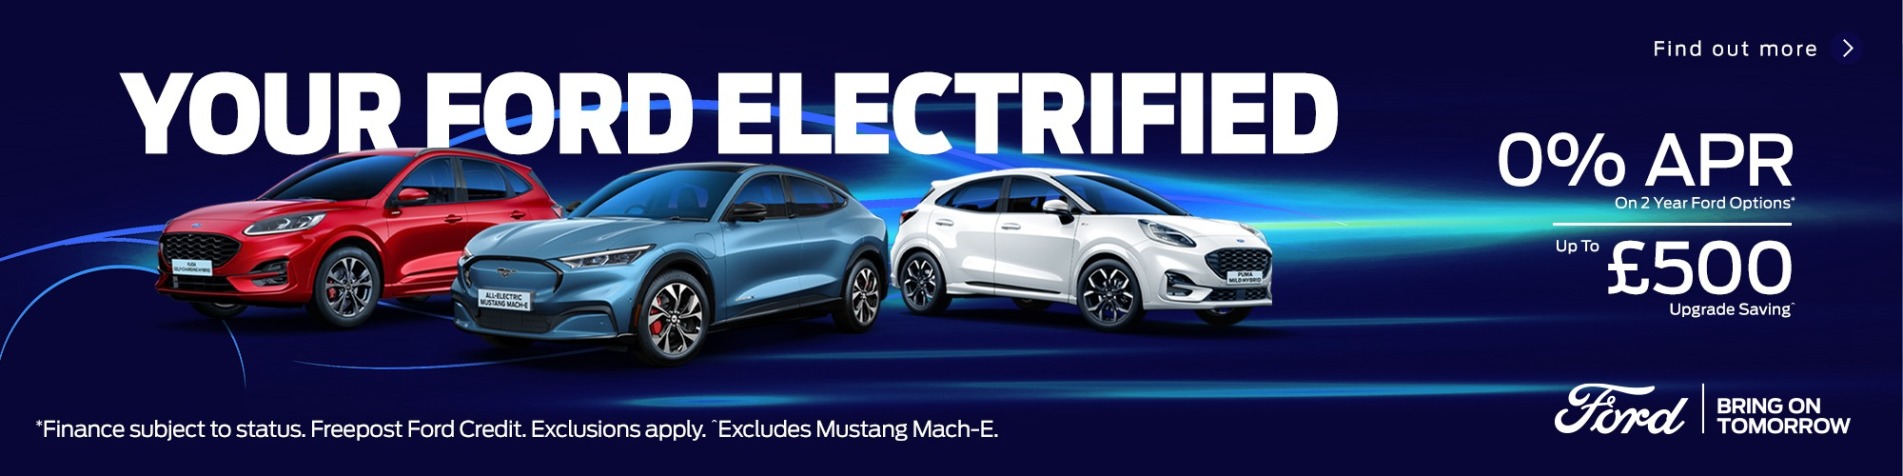 Q3 23 Your Ford Electrified Campaign Homepage Banners